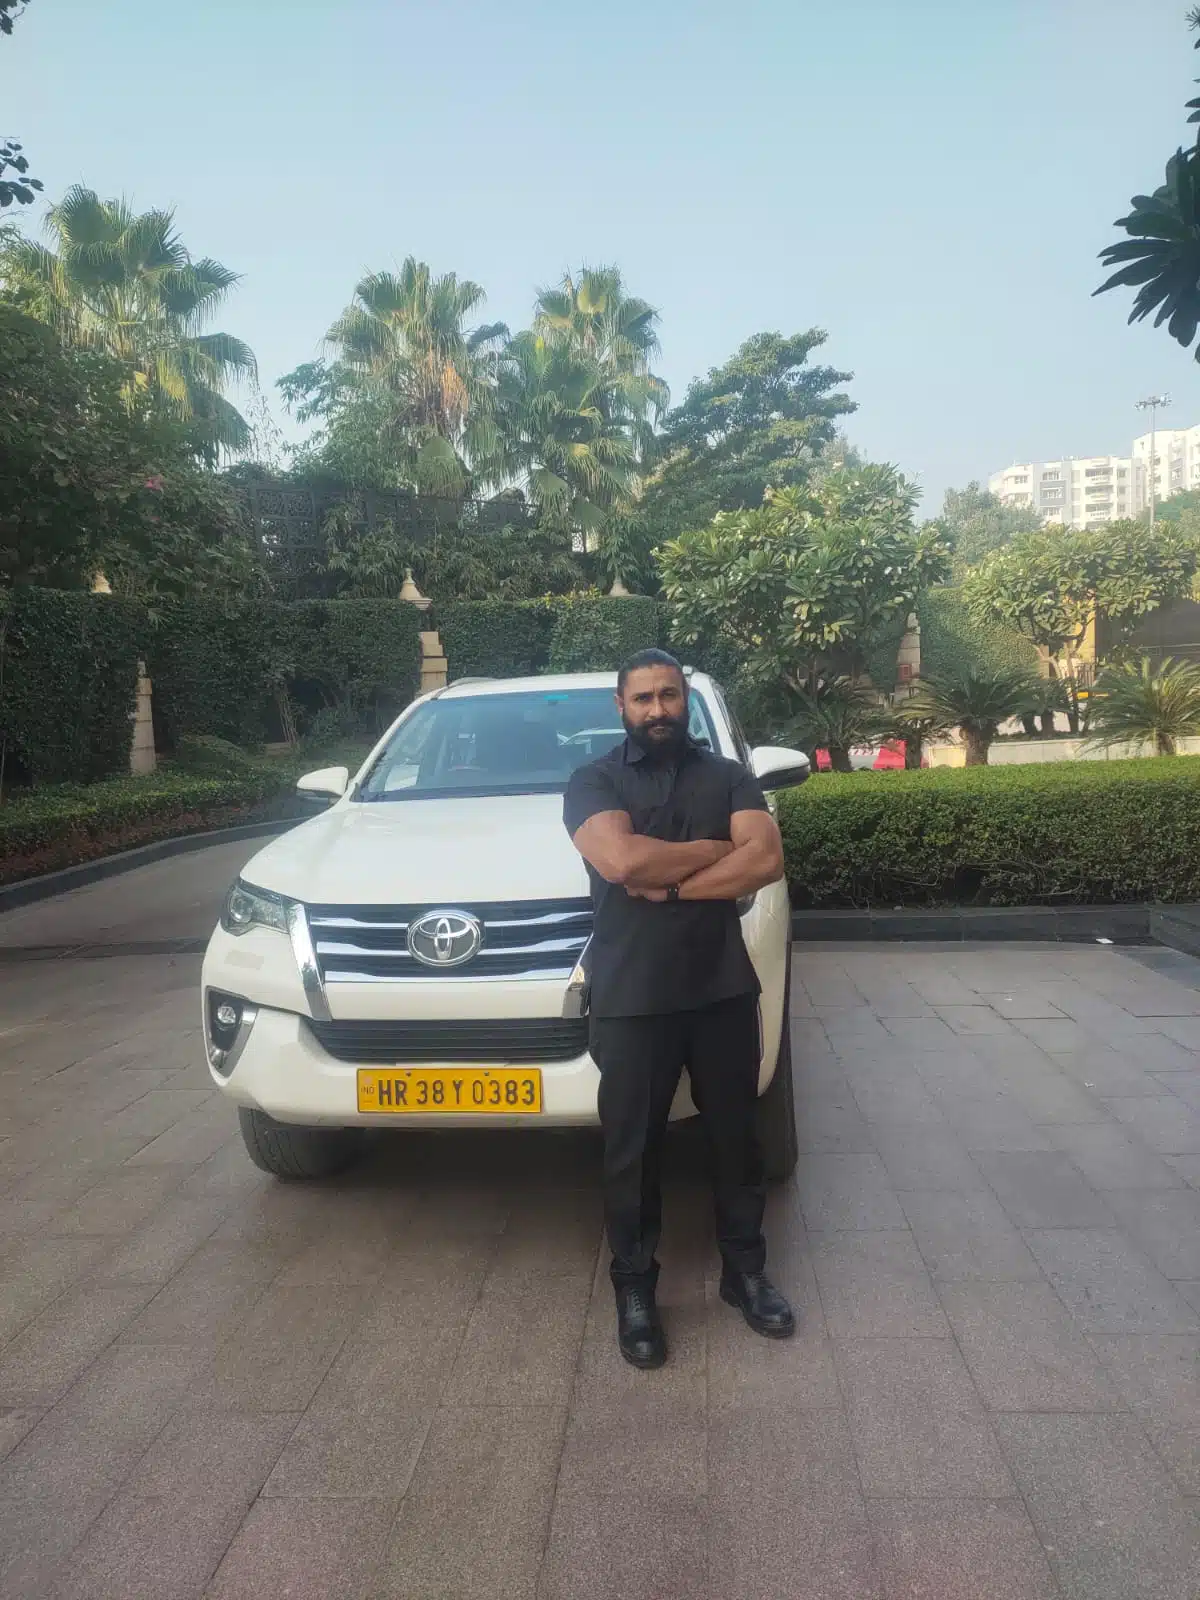 Bodyguard-with-Luxury-Car-security-services-in-India